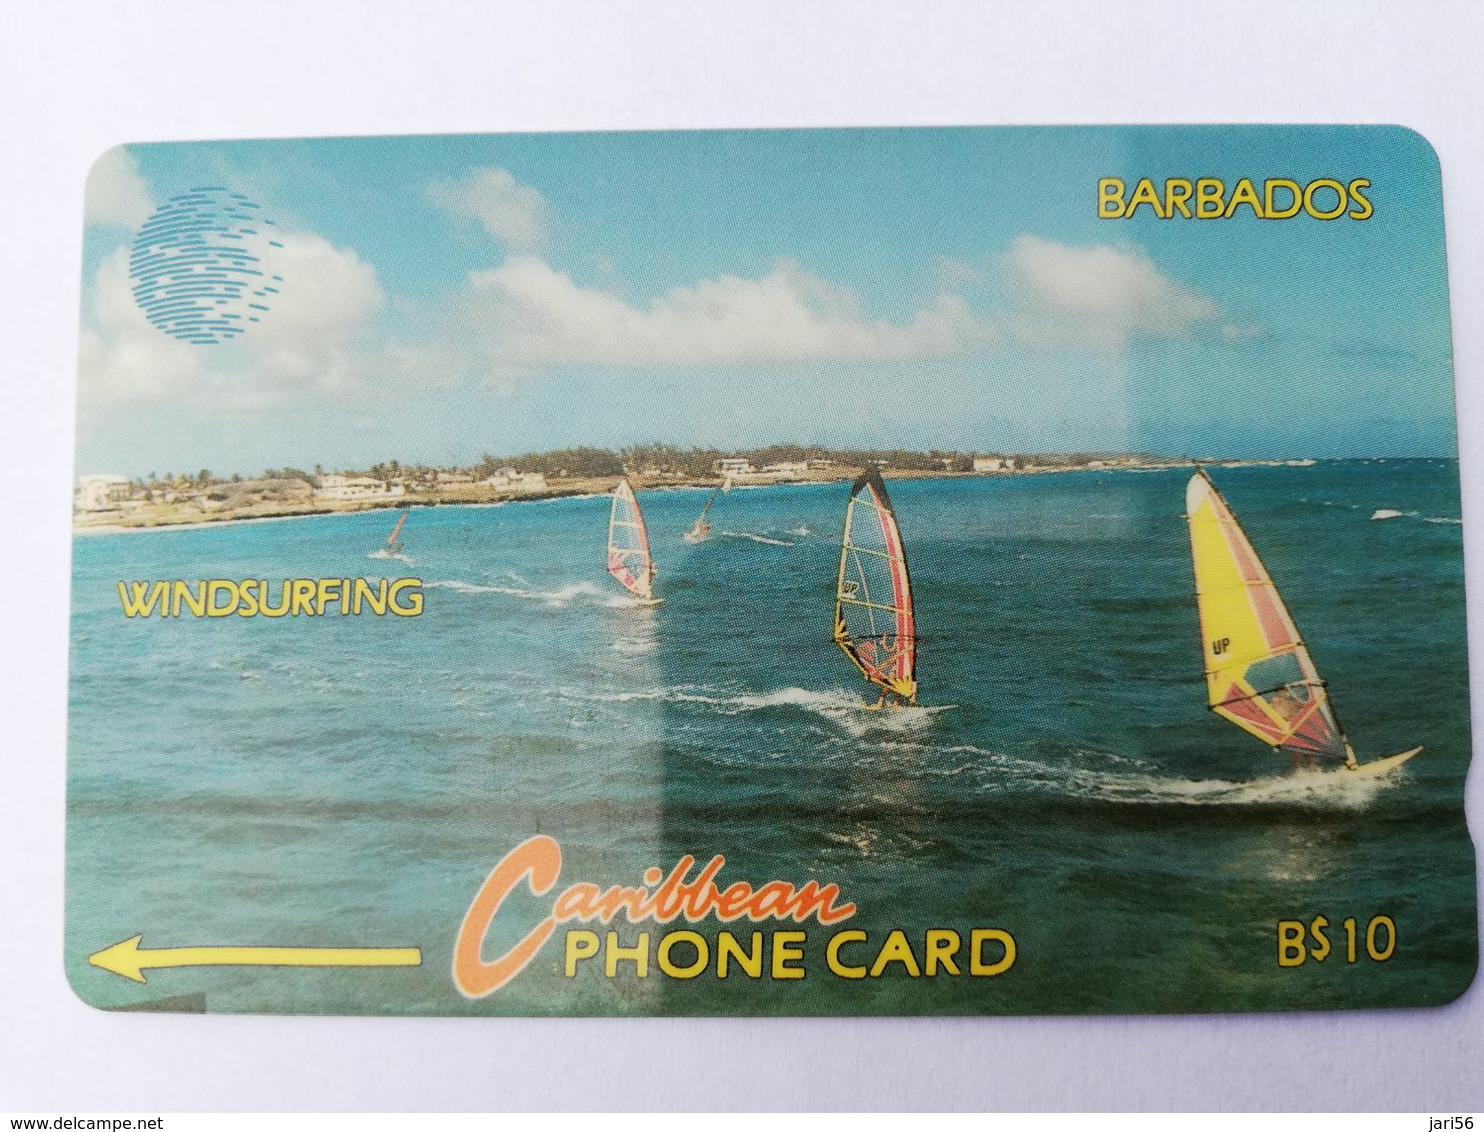 BARBADOS   $10-  Gpt Magnetic     BAR-15A  15CBDA  WINDSURFING     NEW  LOGO   Very Fine Used  Card  ** 2890** - Barbades